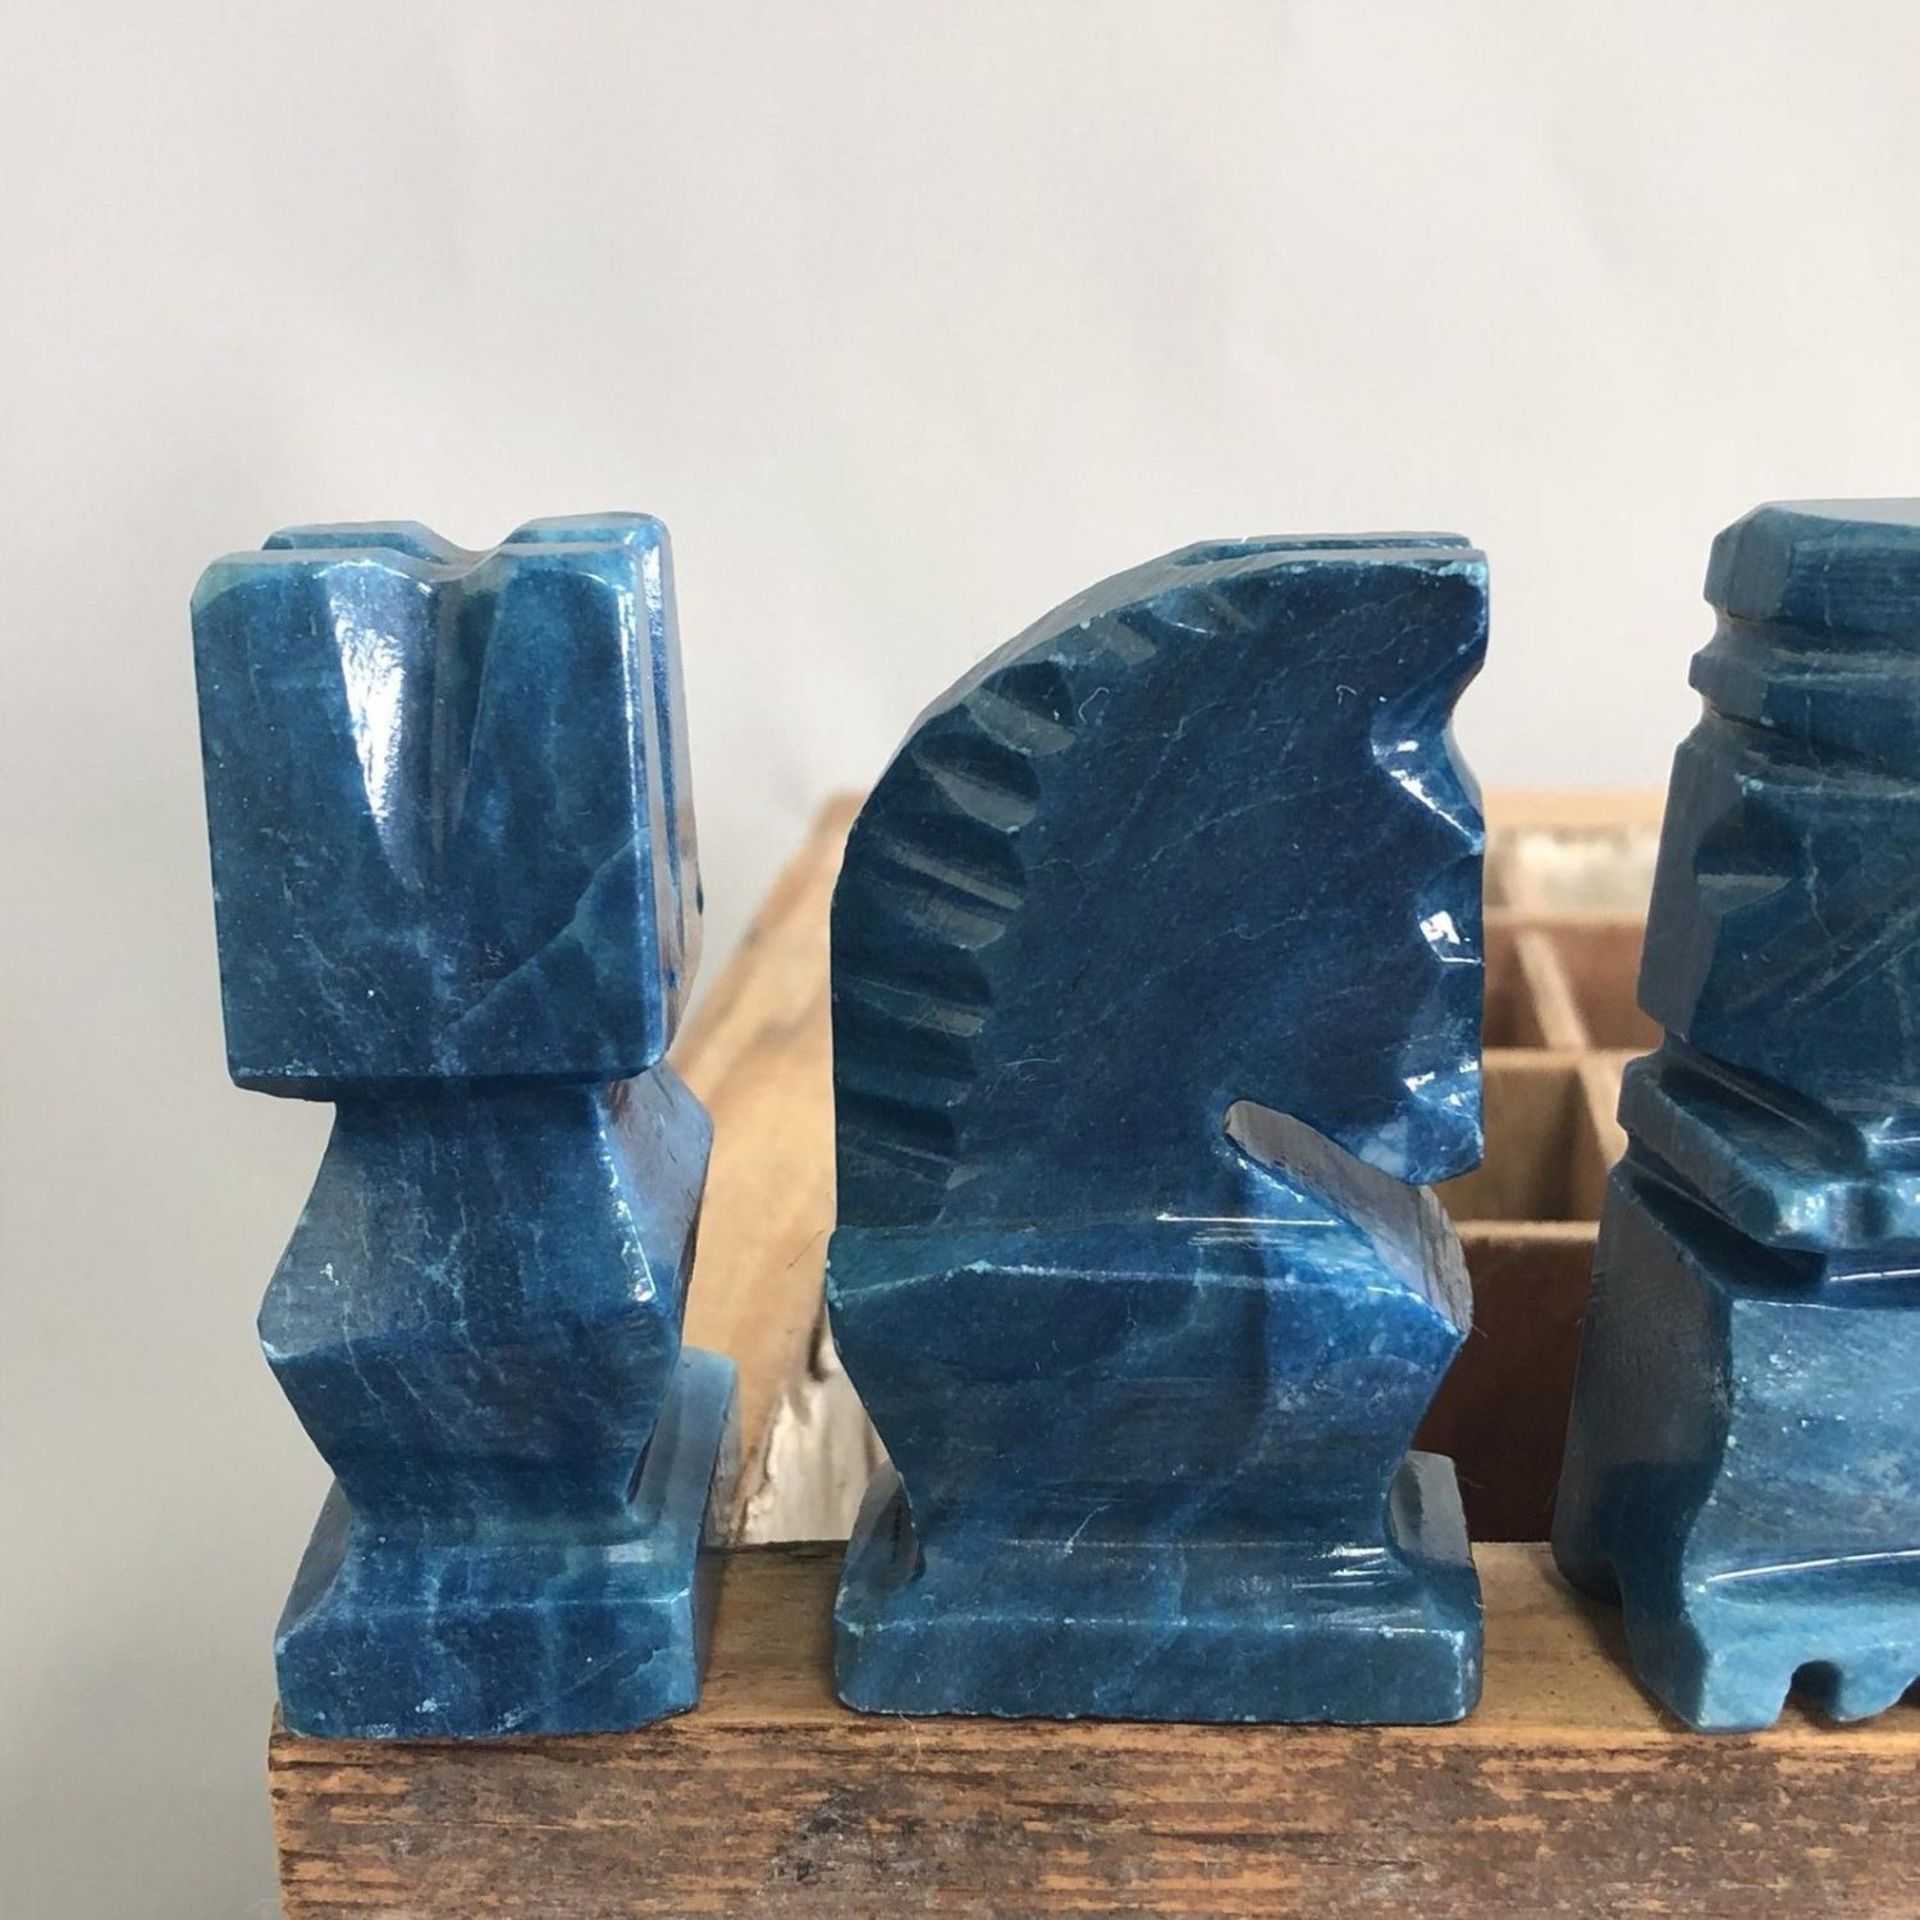 Vintage carved blue and white quartz chess pieces set - Mayan / Aztec / Mexican - Image 5 of 7